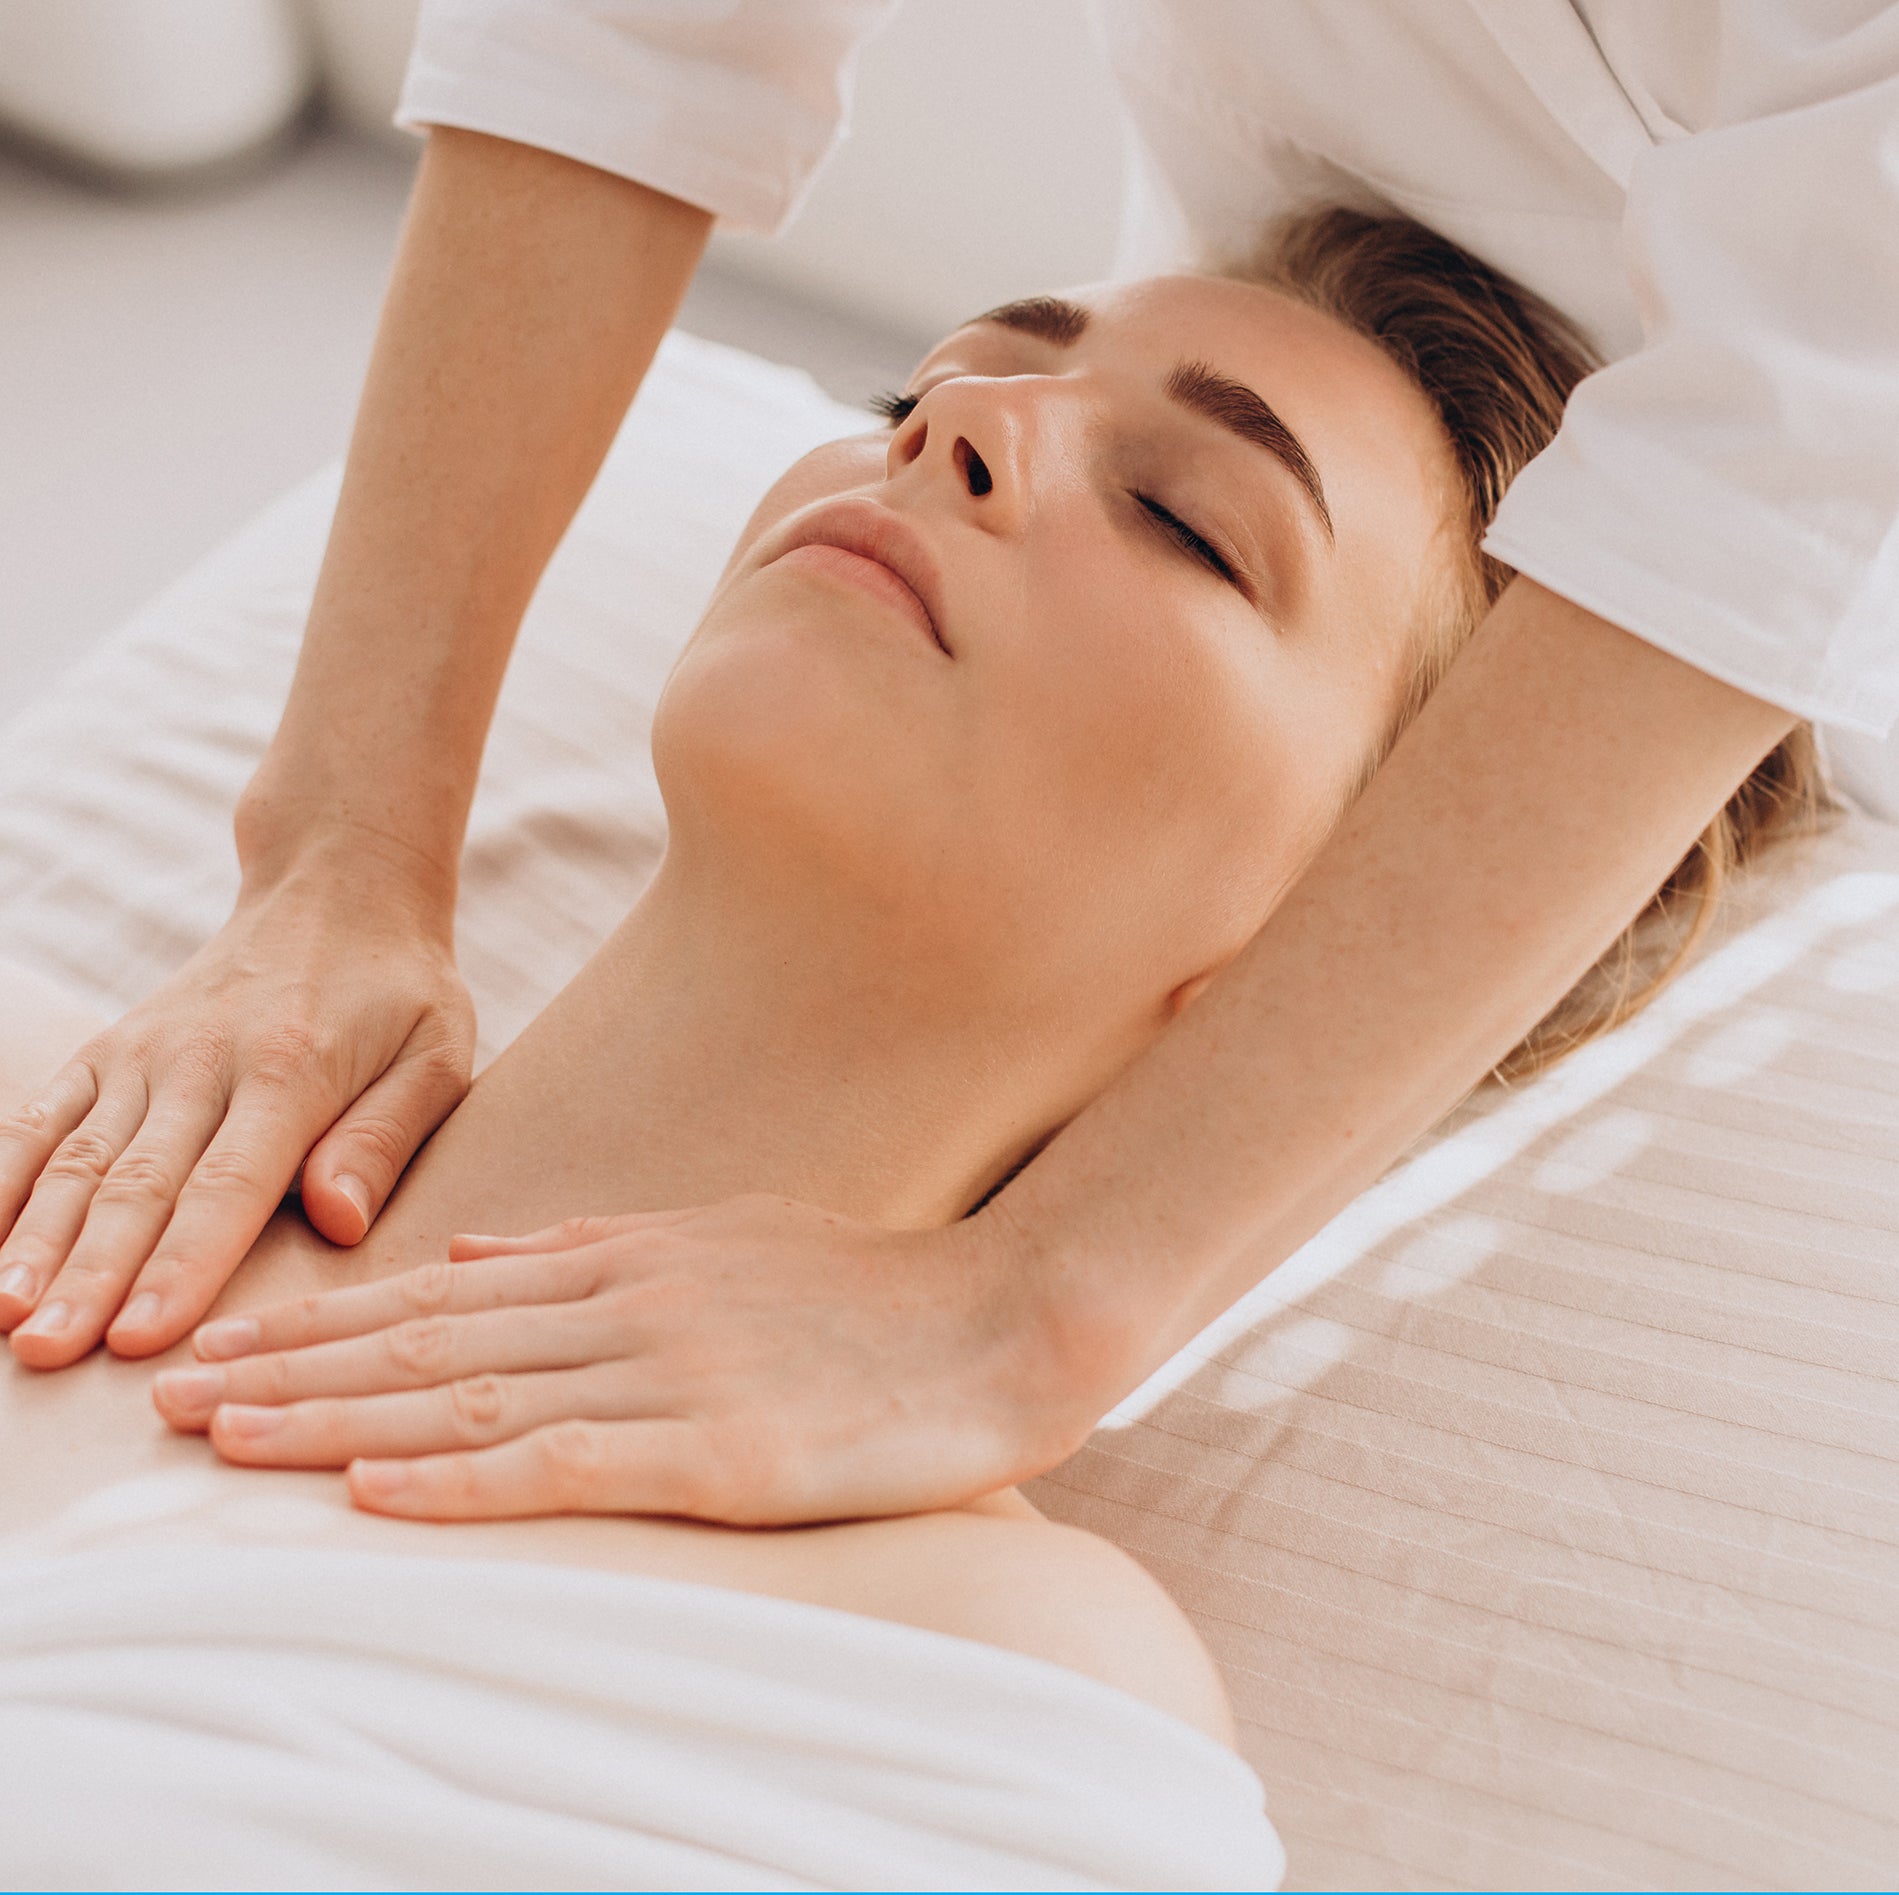 What Are The Benefits Of Facial Massage?